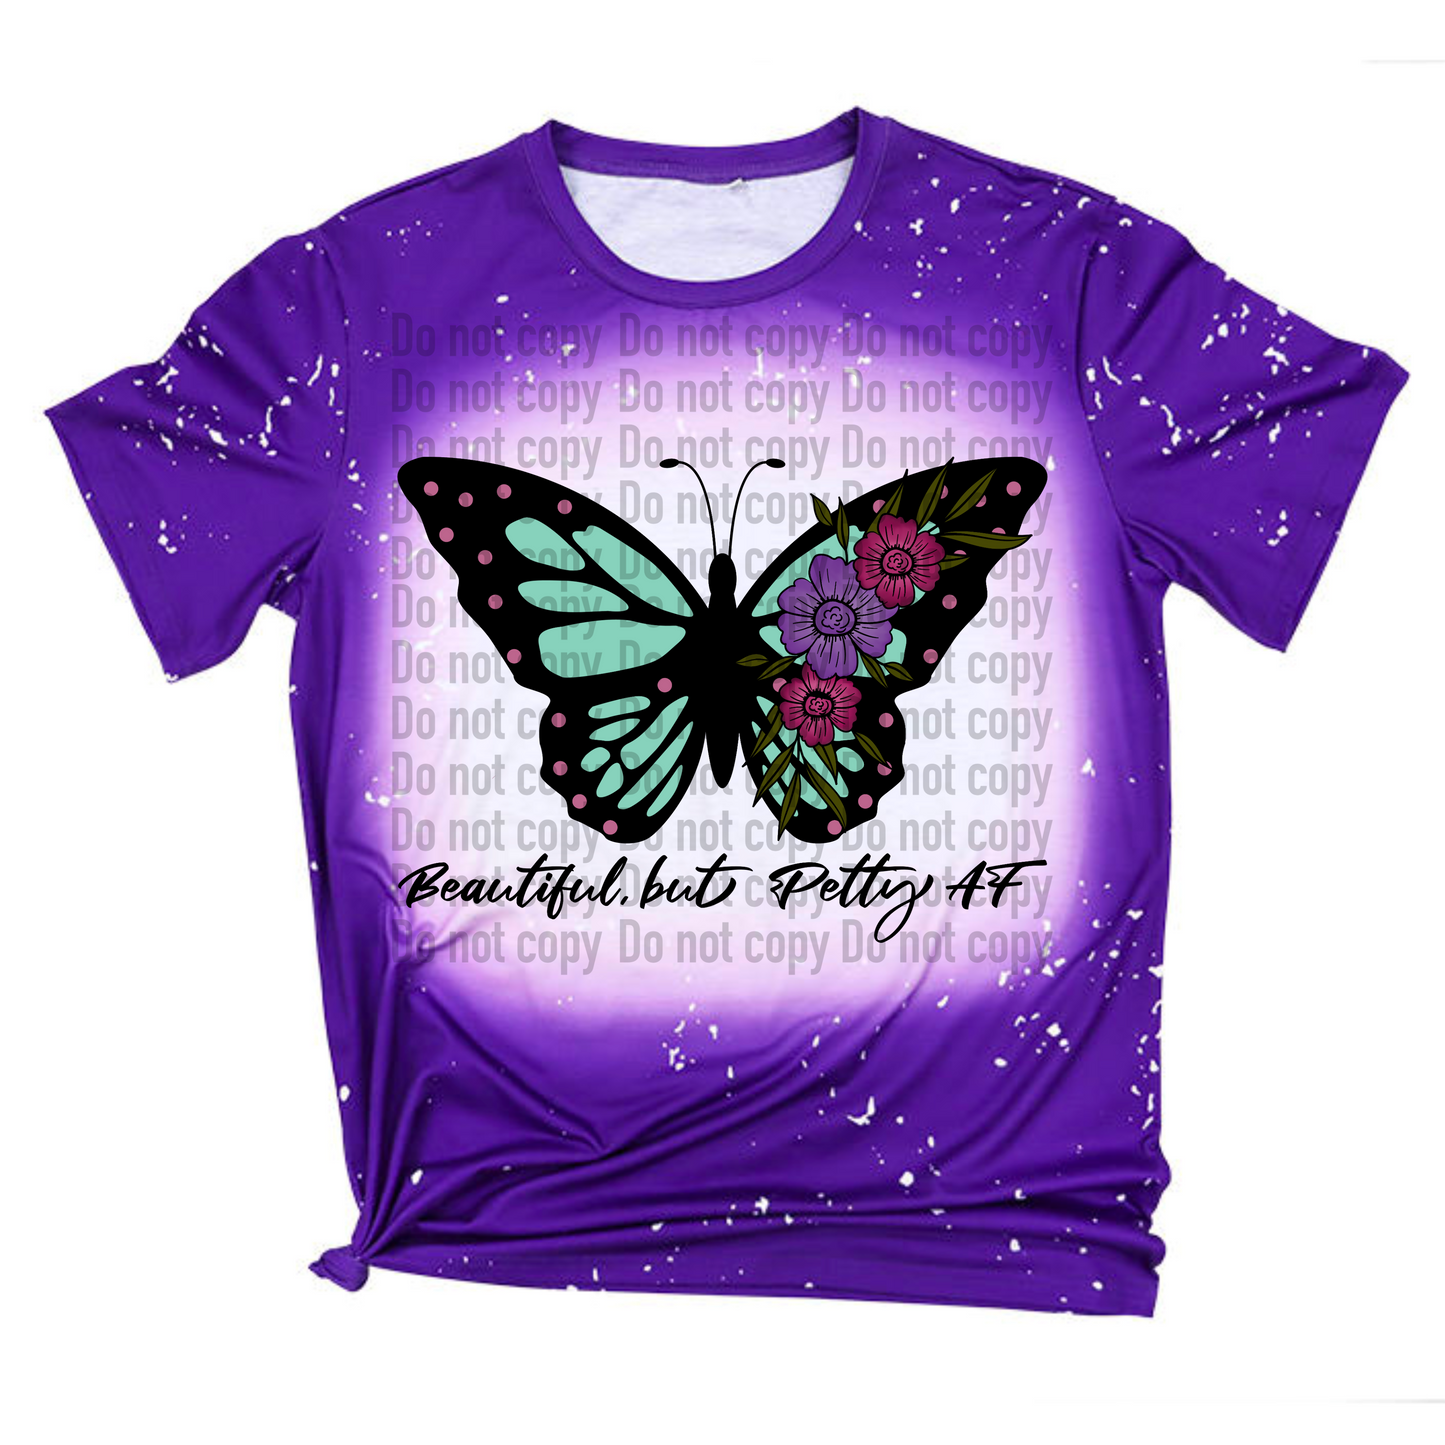 Petty Af Butterfly - T-Shirt & Hoodie